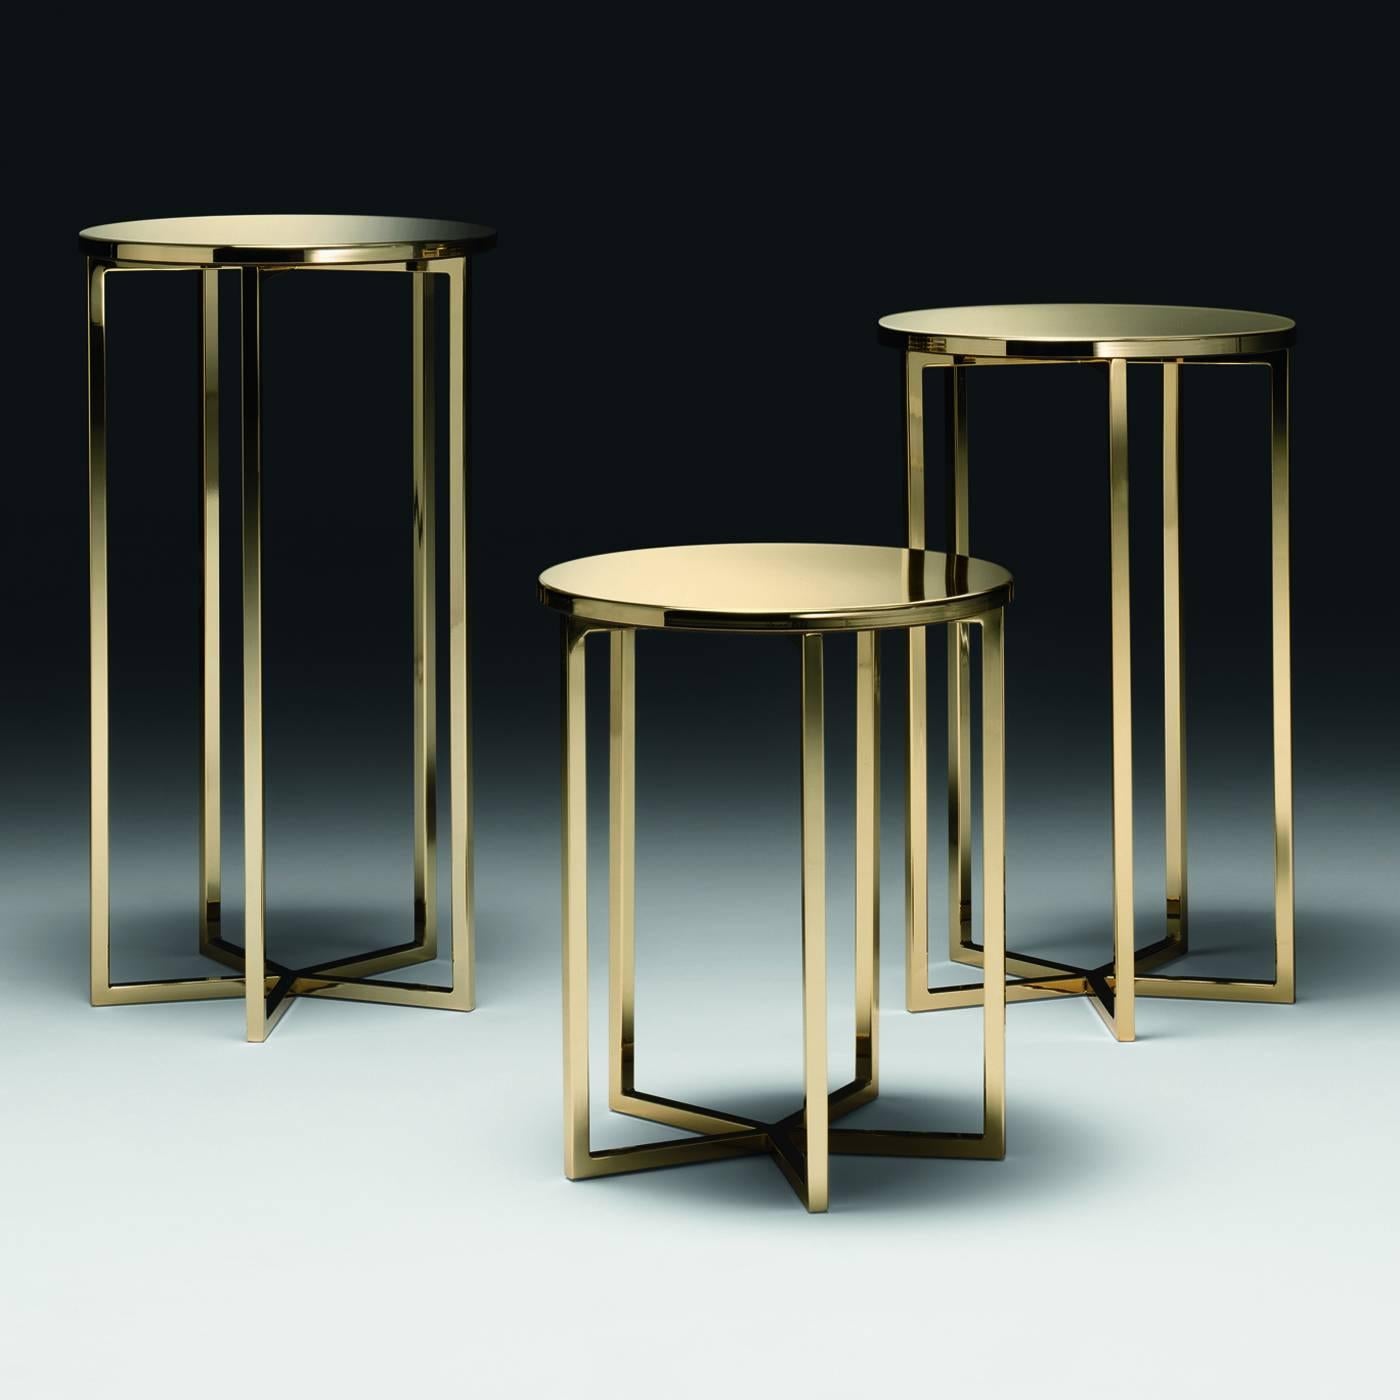 This round metal side table has a striking gold finish. The round shape of the top and the converging straight elements that support it create an elegant harmony.